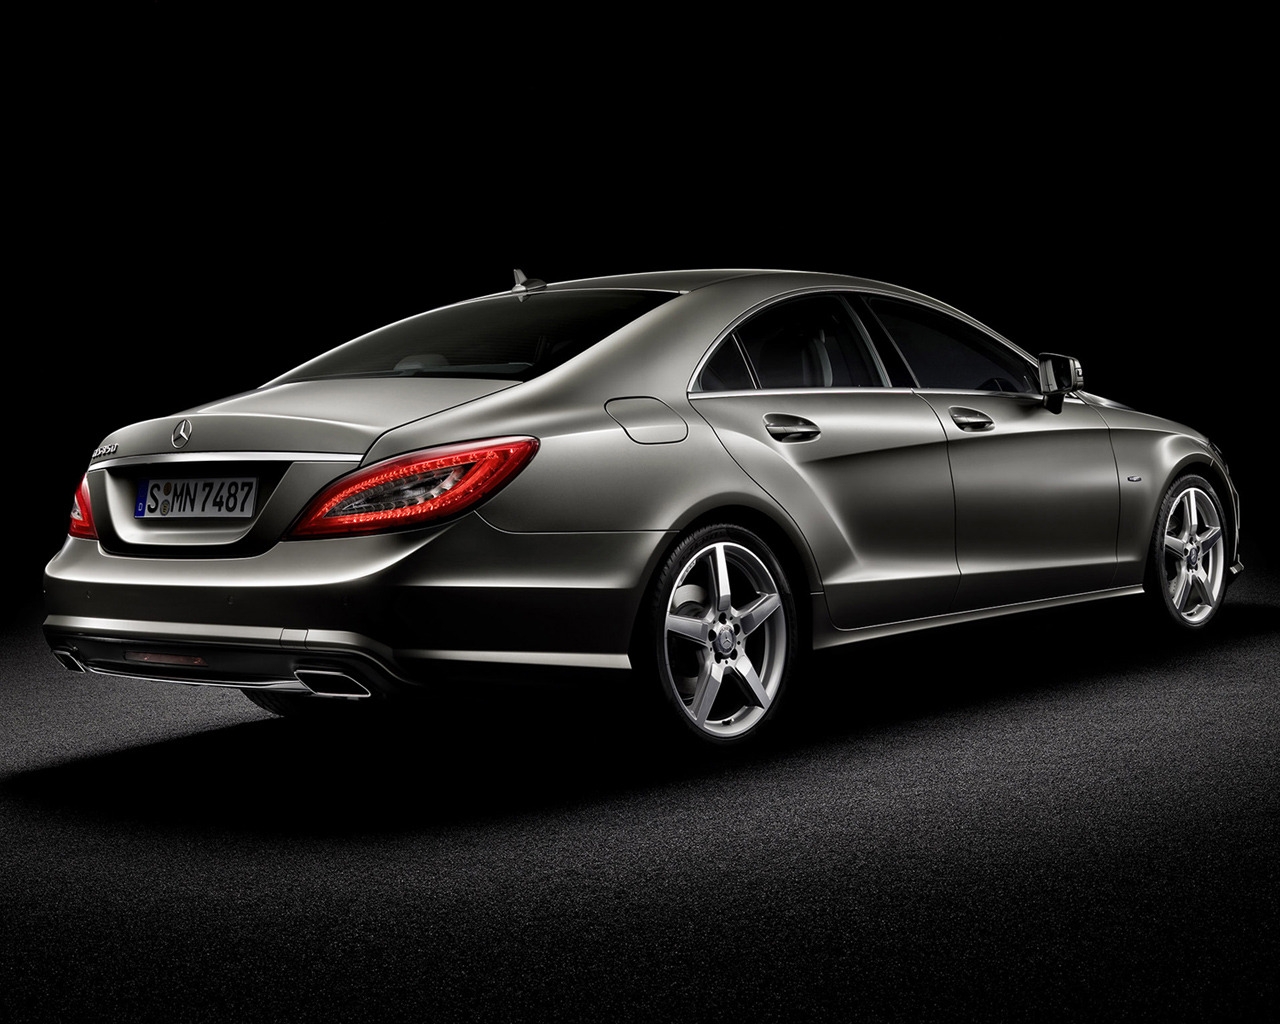 Mercedes CLS 2010 Rear for 1280 x 1024 resolution